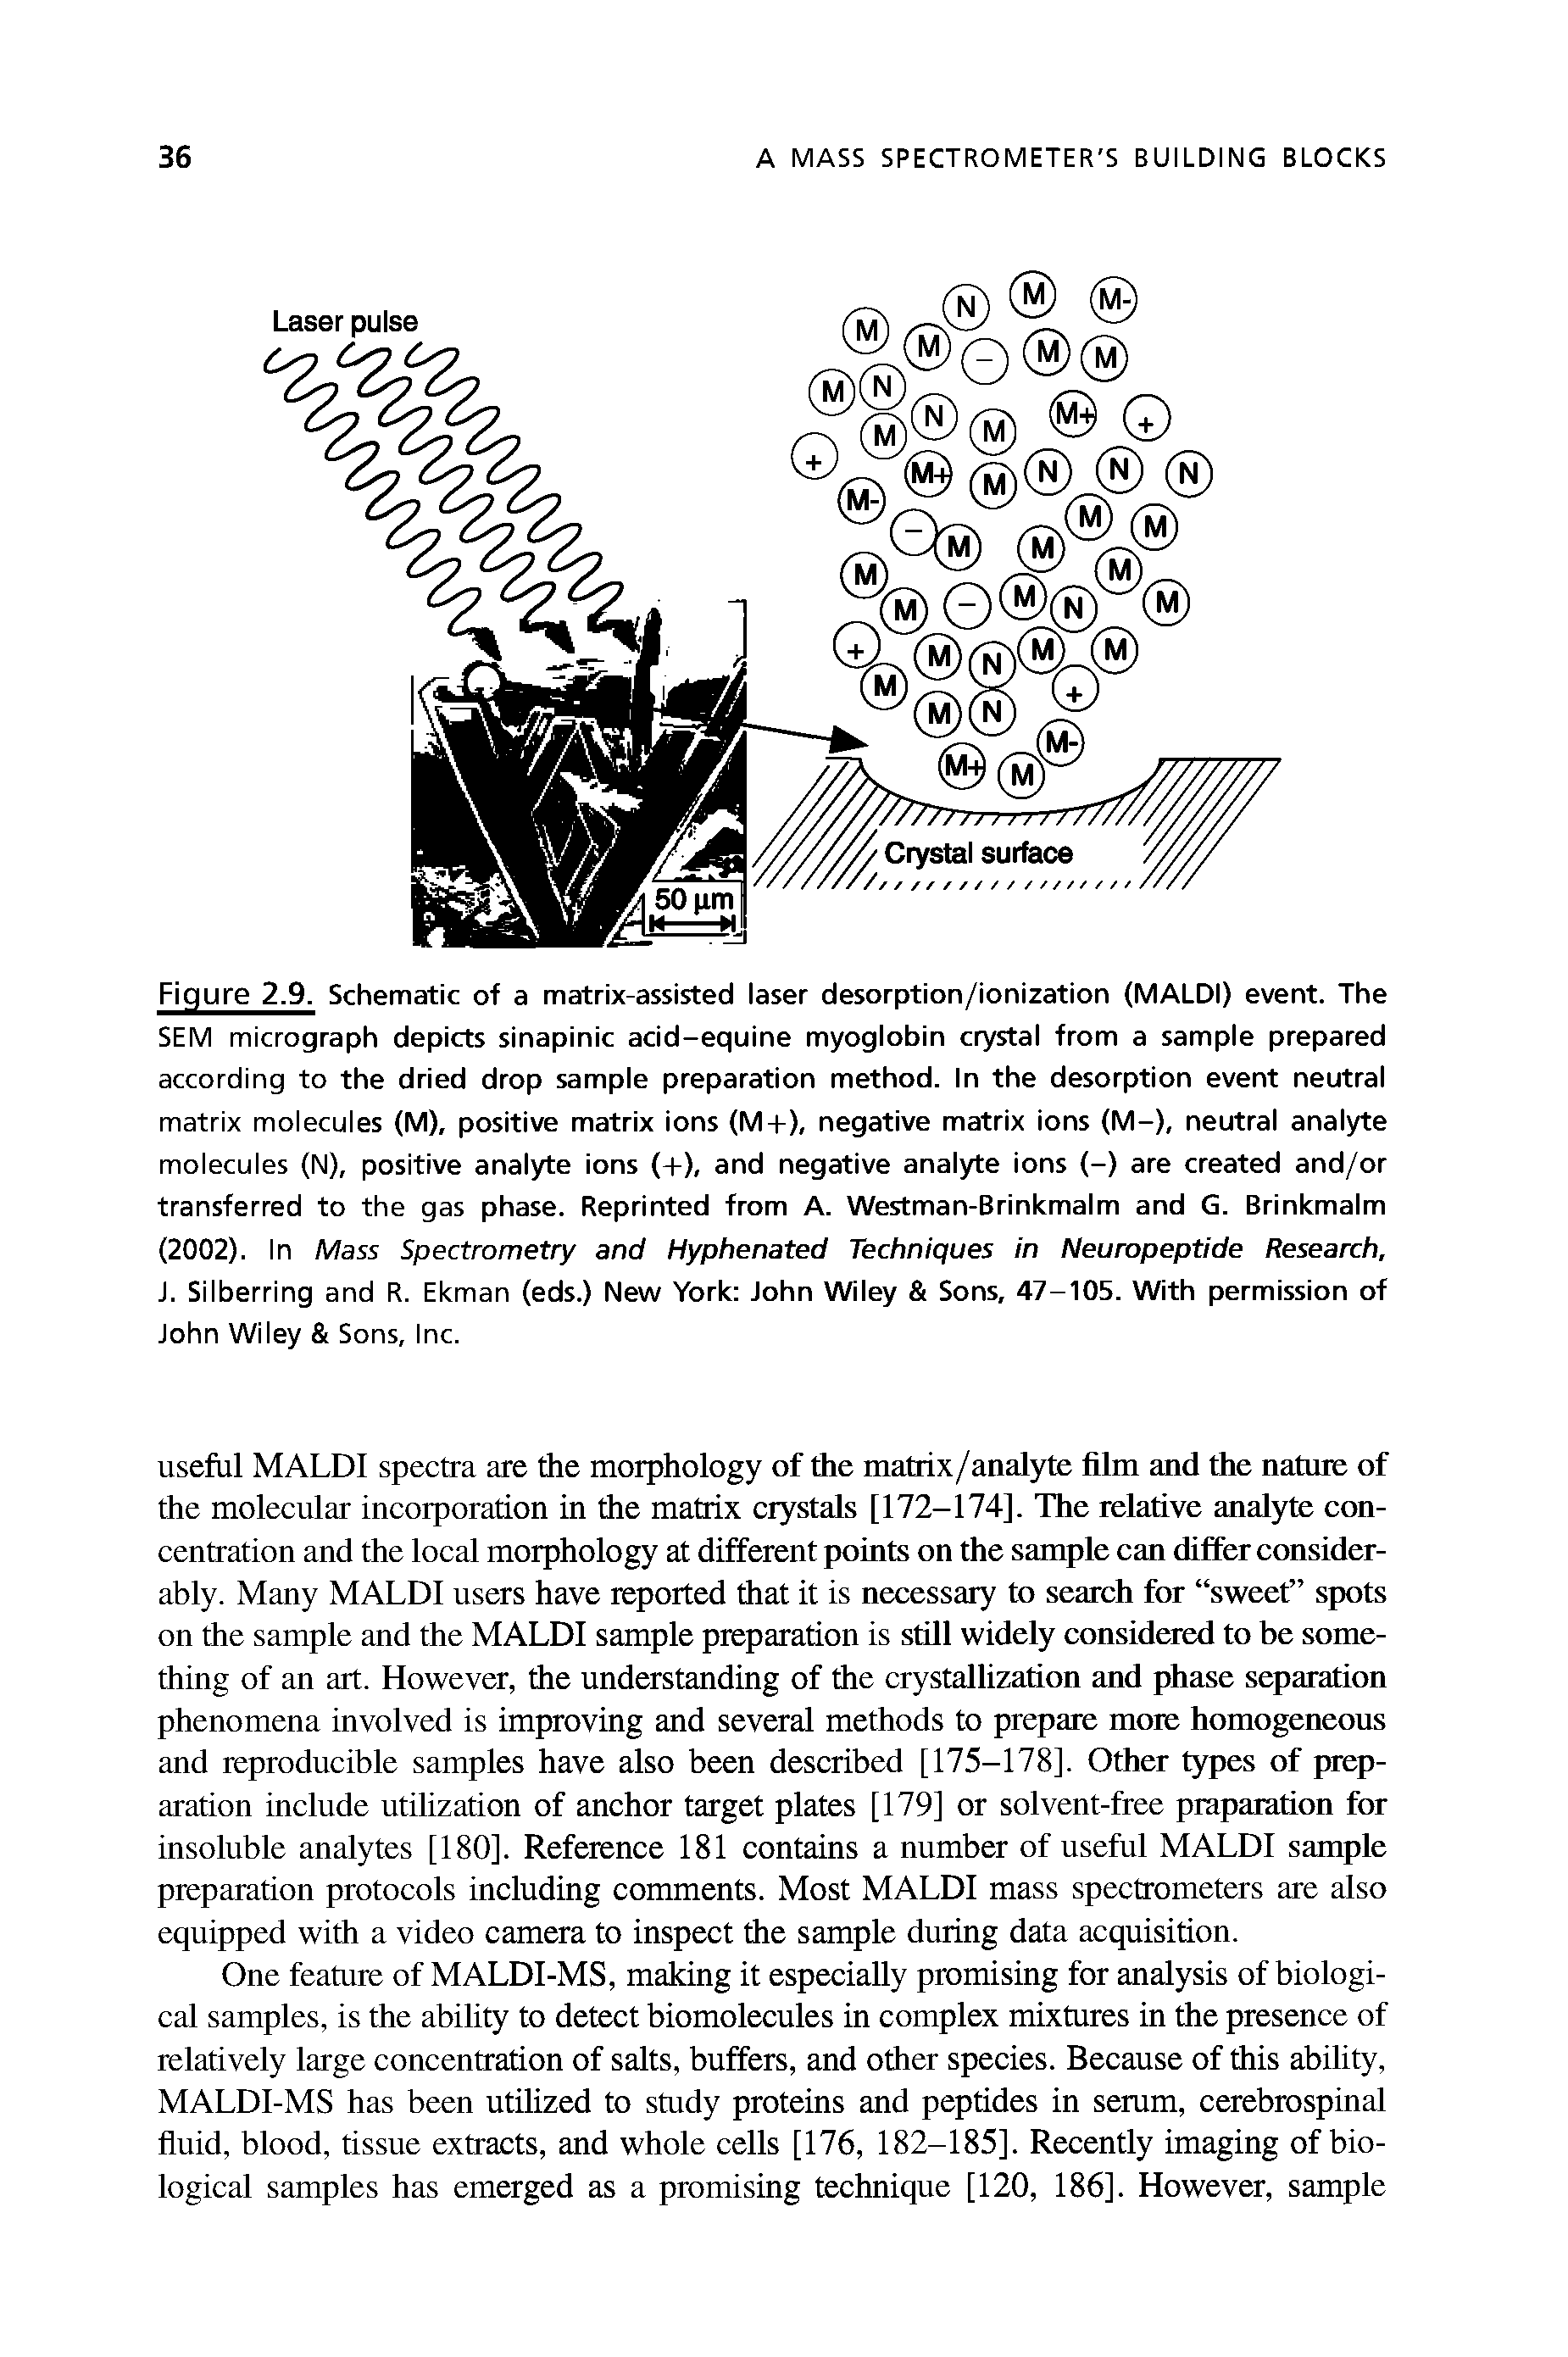 Figure 2.9. Schematic of a matrix-assisted laser desorption/ionization (MALDI) event. The SEM micrograph depicts sinapinic acid-equine myoglobin crystal from a sample prepared according to the dried drop sample preparation method. In the desorption event neutral matrix molecules (M), positive matrix ions (M+), negative matrix ions (M-), neutral analyte molecules (N), positive analyte ions (+), and negative analyte ions (-) are created and/or transferred to the gas phase. Reprinted from A. Westman-Brinkmalm and G. Brinkmalm (2002). In Mass Spectrometry and Hyphenated Techniques in Neuropeptide Research, J. Silberring and R. Ekman (eds.) New York John Wiley Sons, 47-105. With permission of John Wiley Sons, Inc.